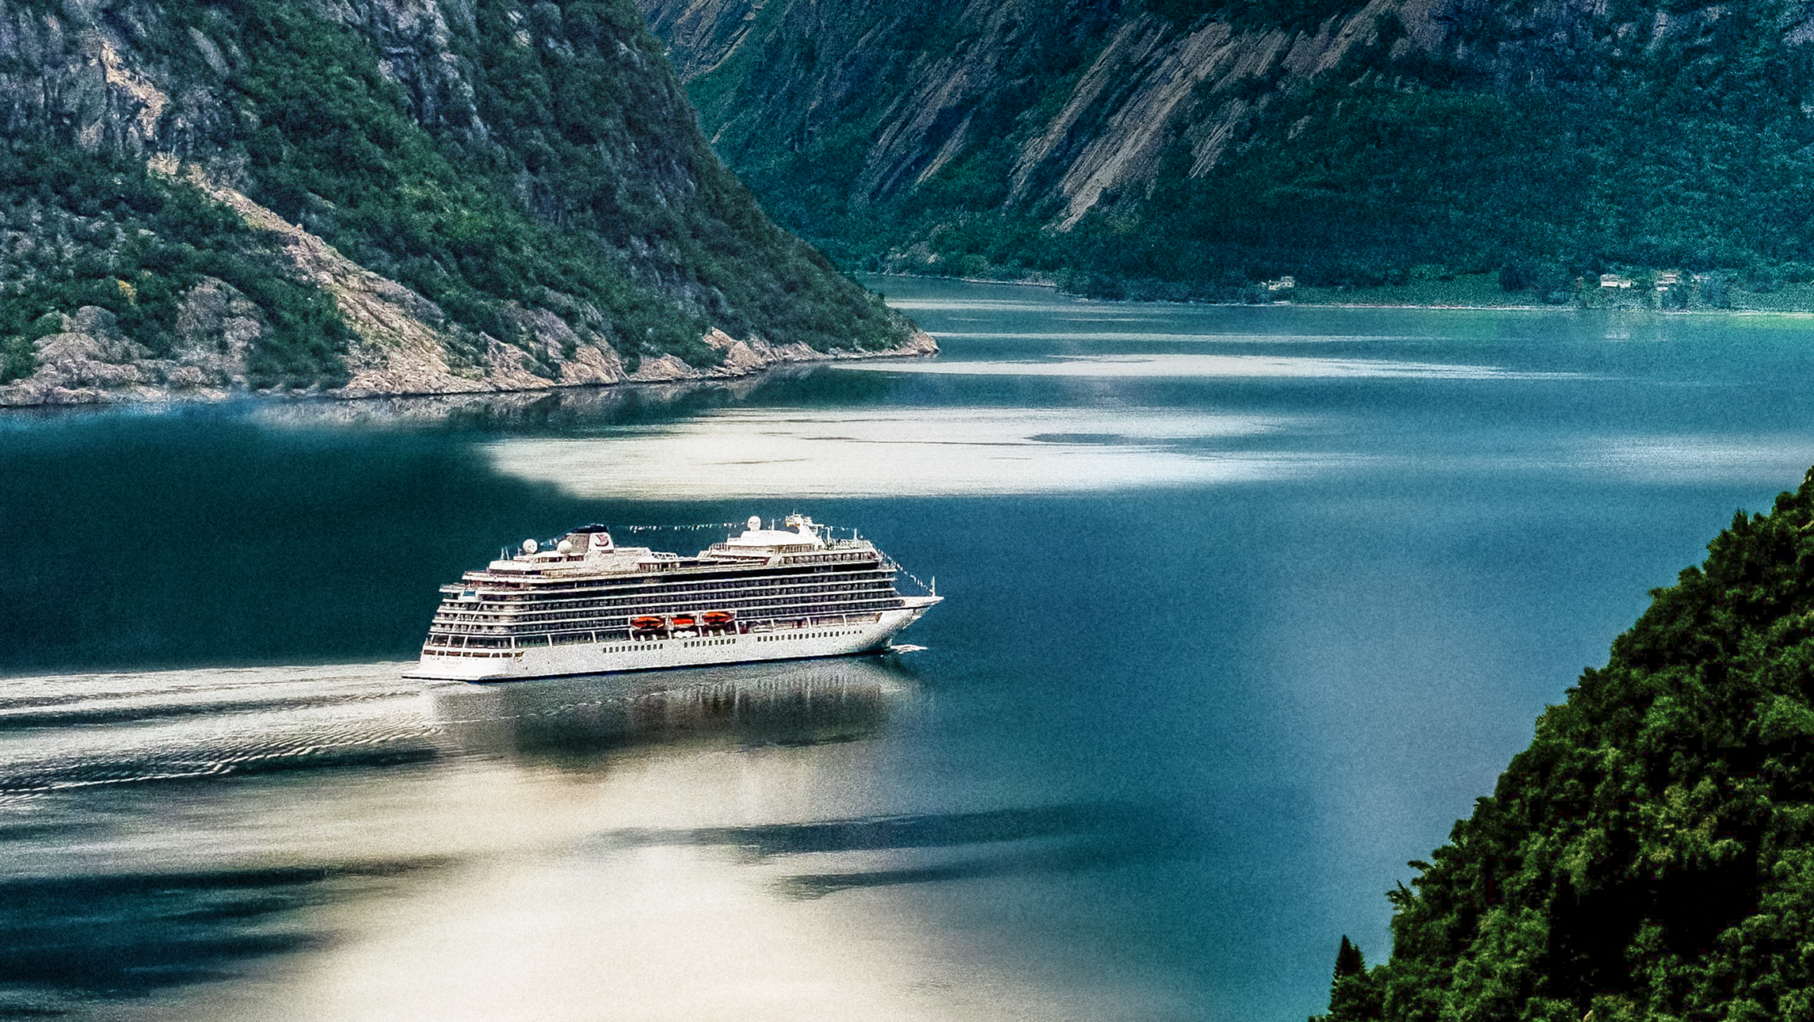 A view of the Viking ship in the Norwegian Fjords